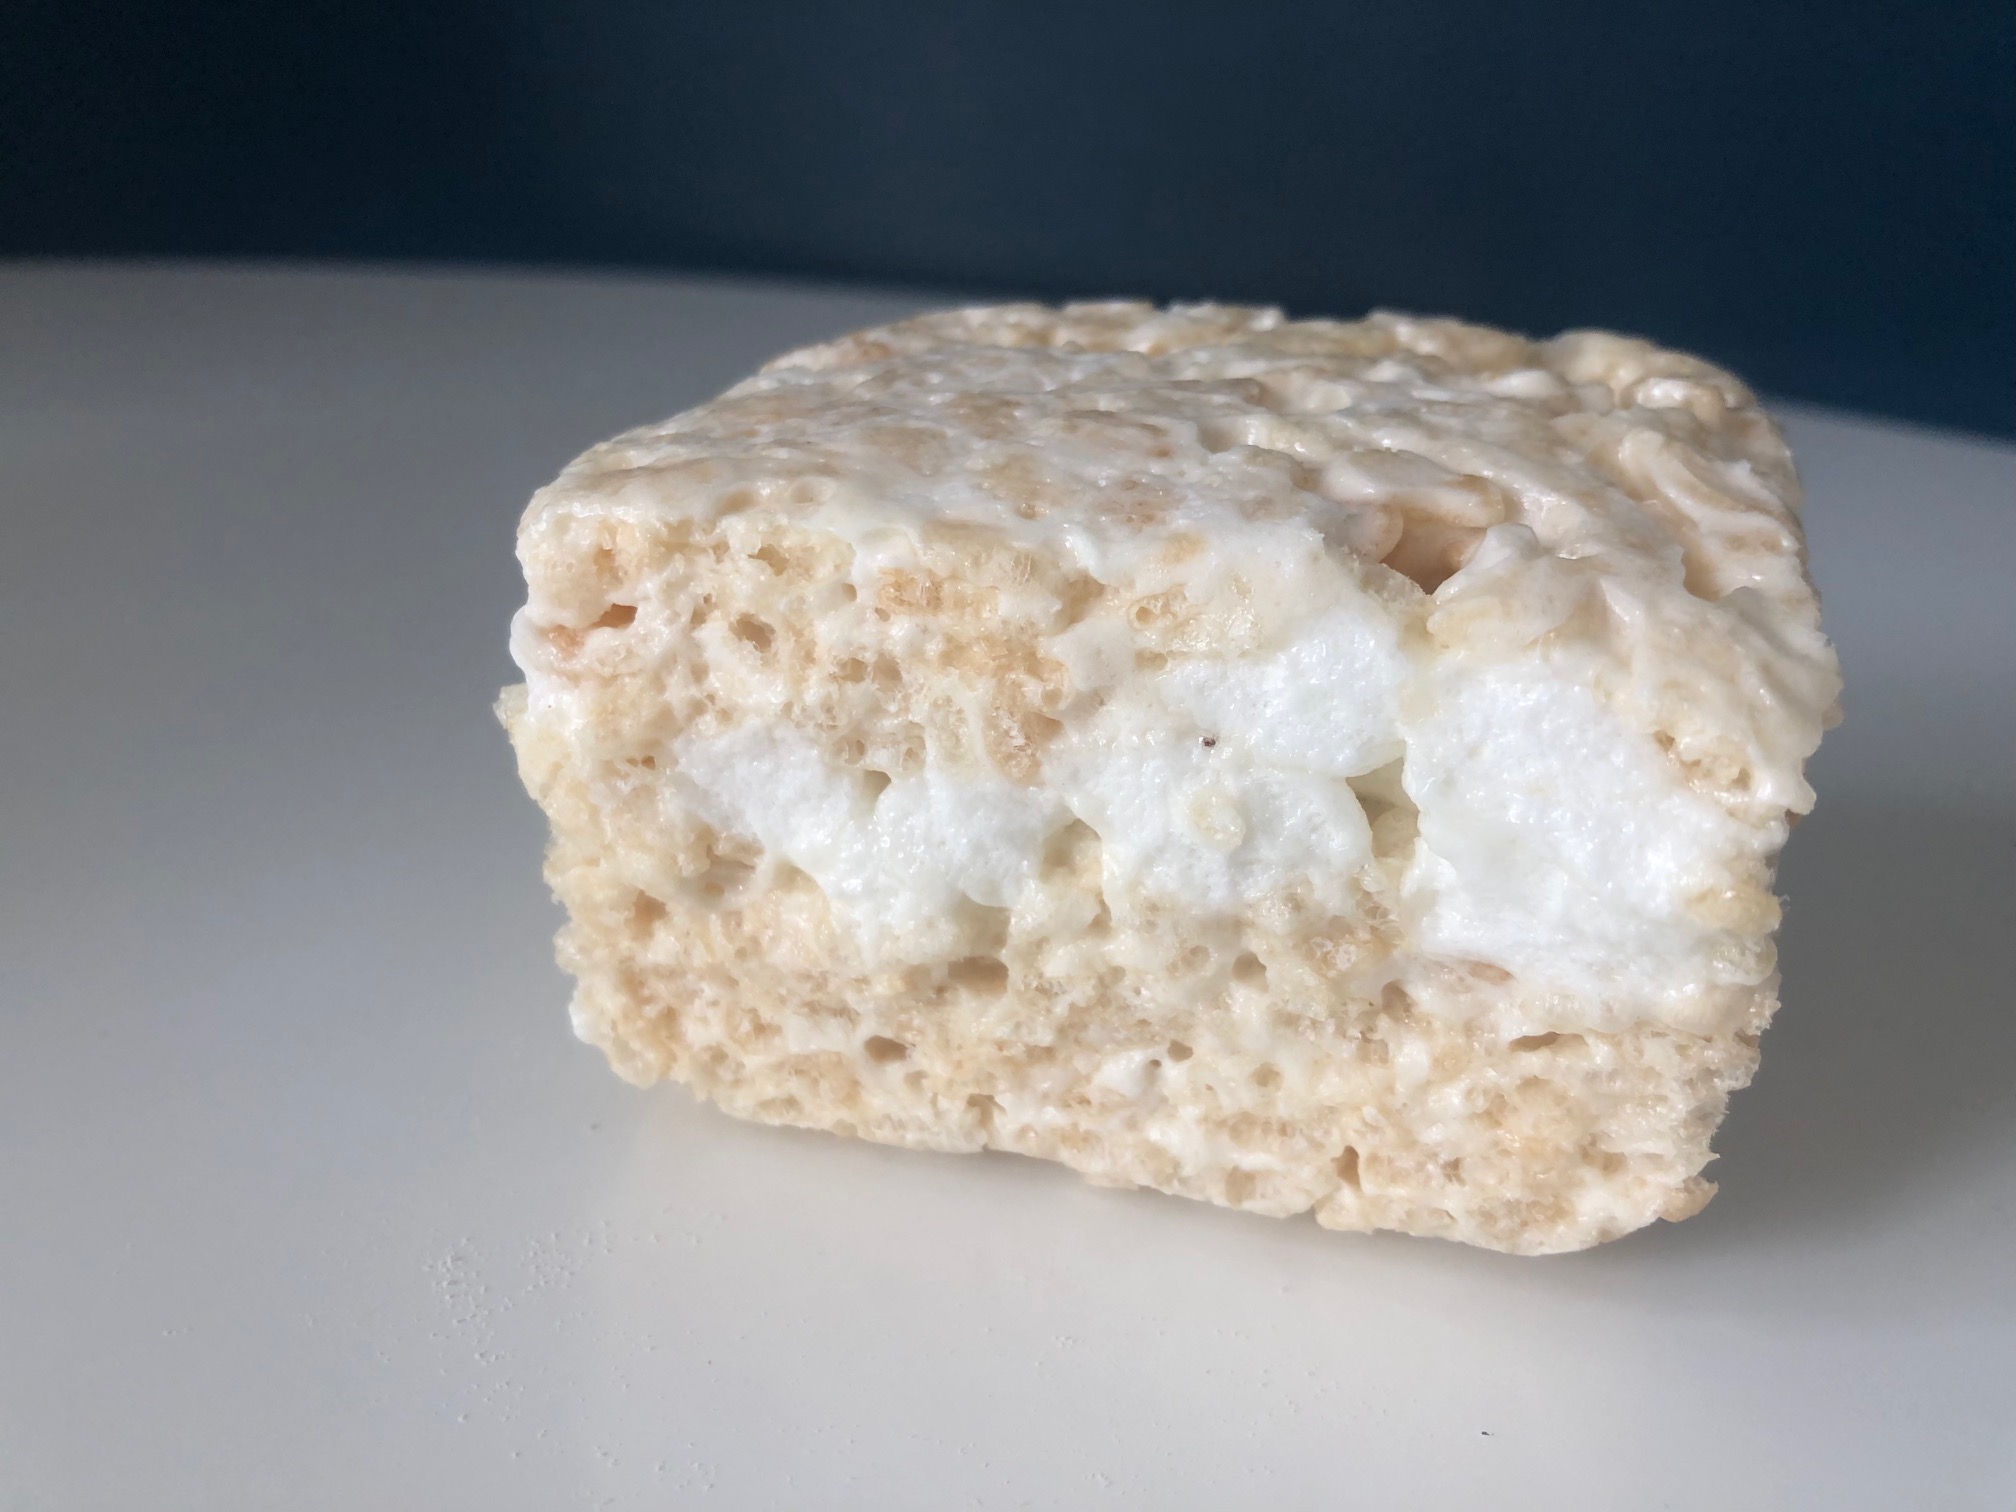 On a white plate, there is a brick of rice krispie treat with visible mini marshmallows. Photo by Alyssa Buckley.